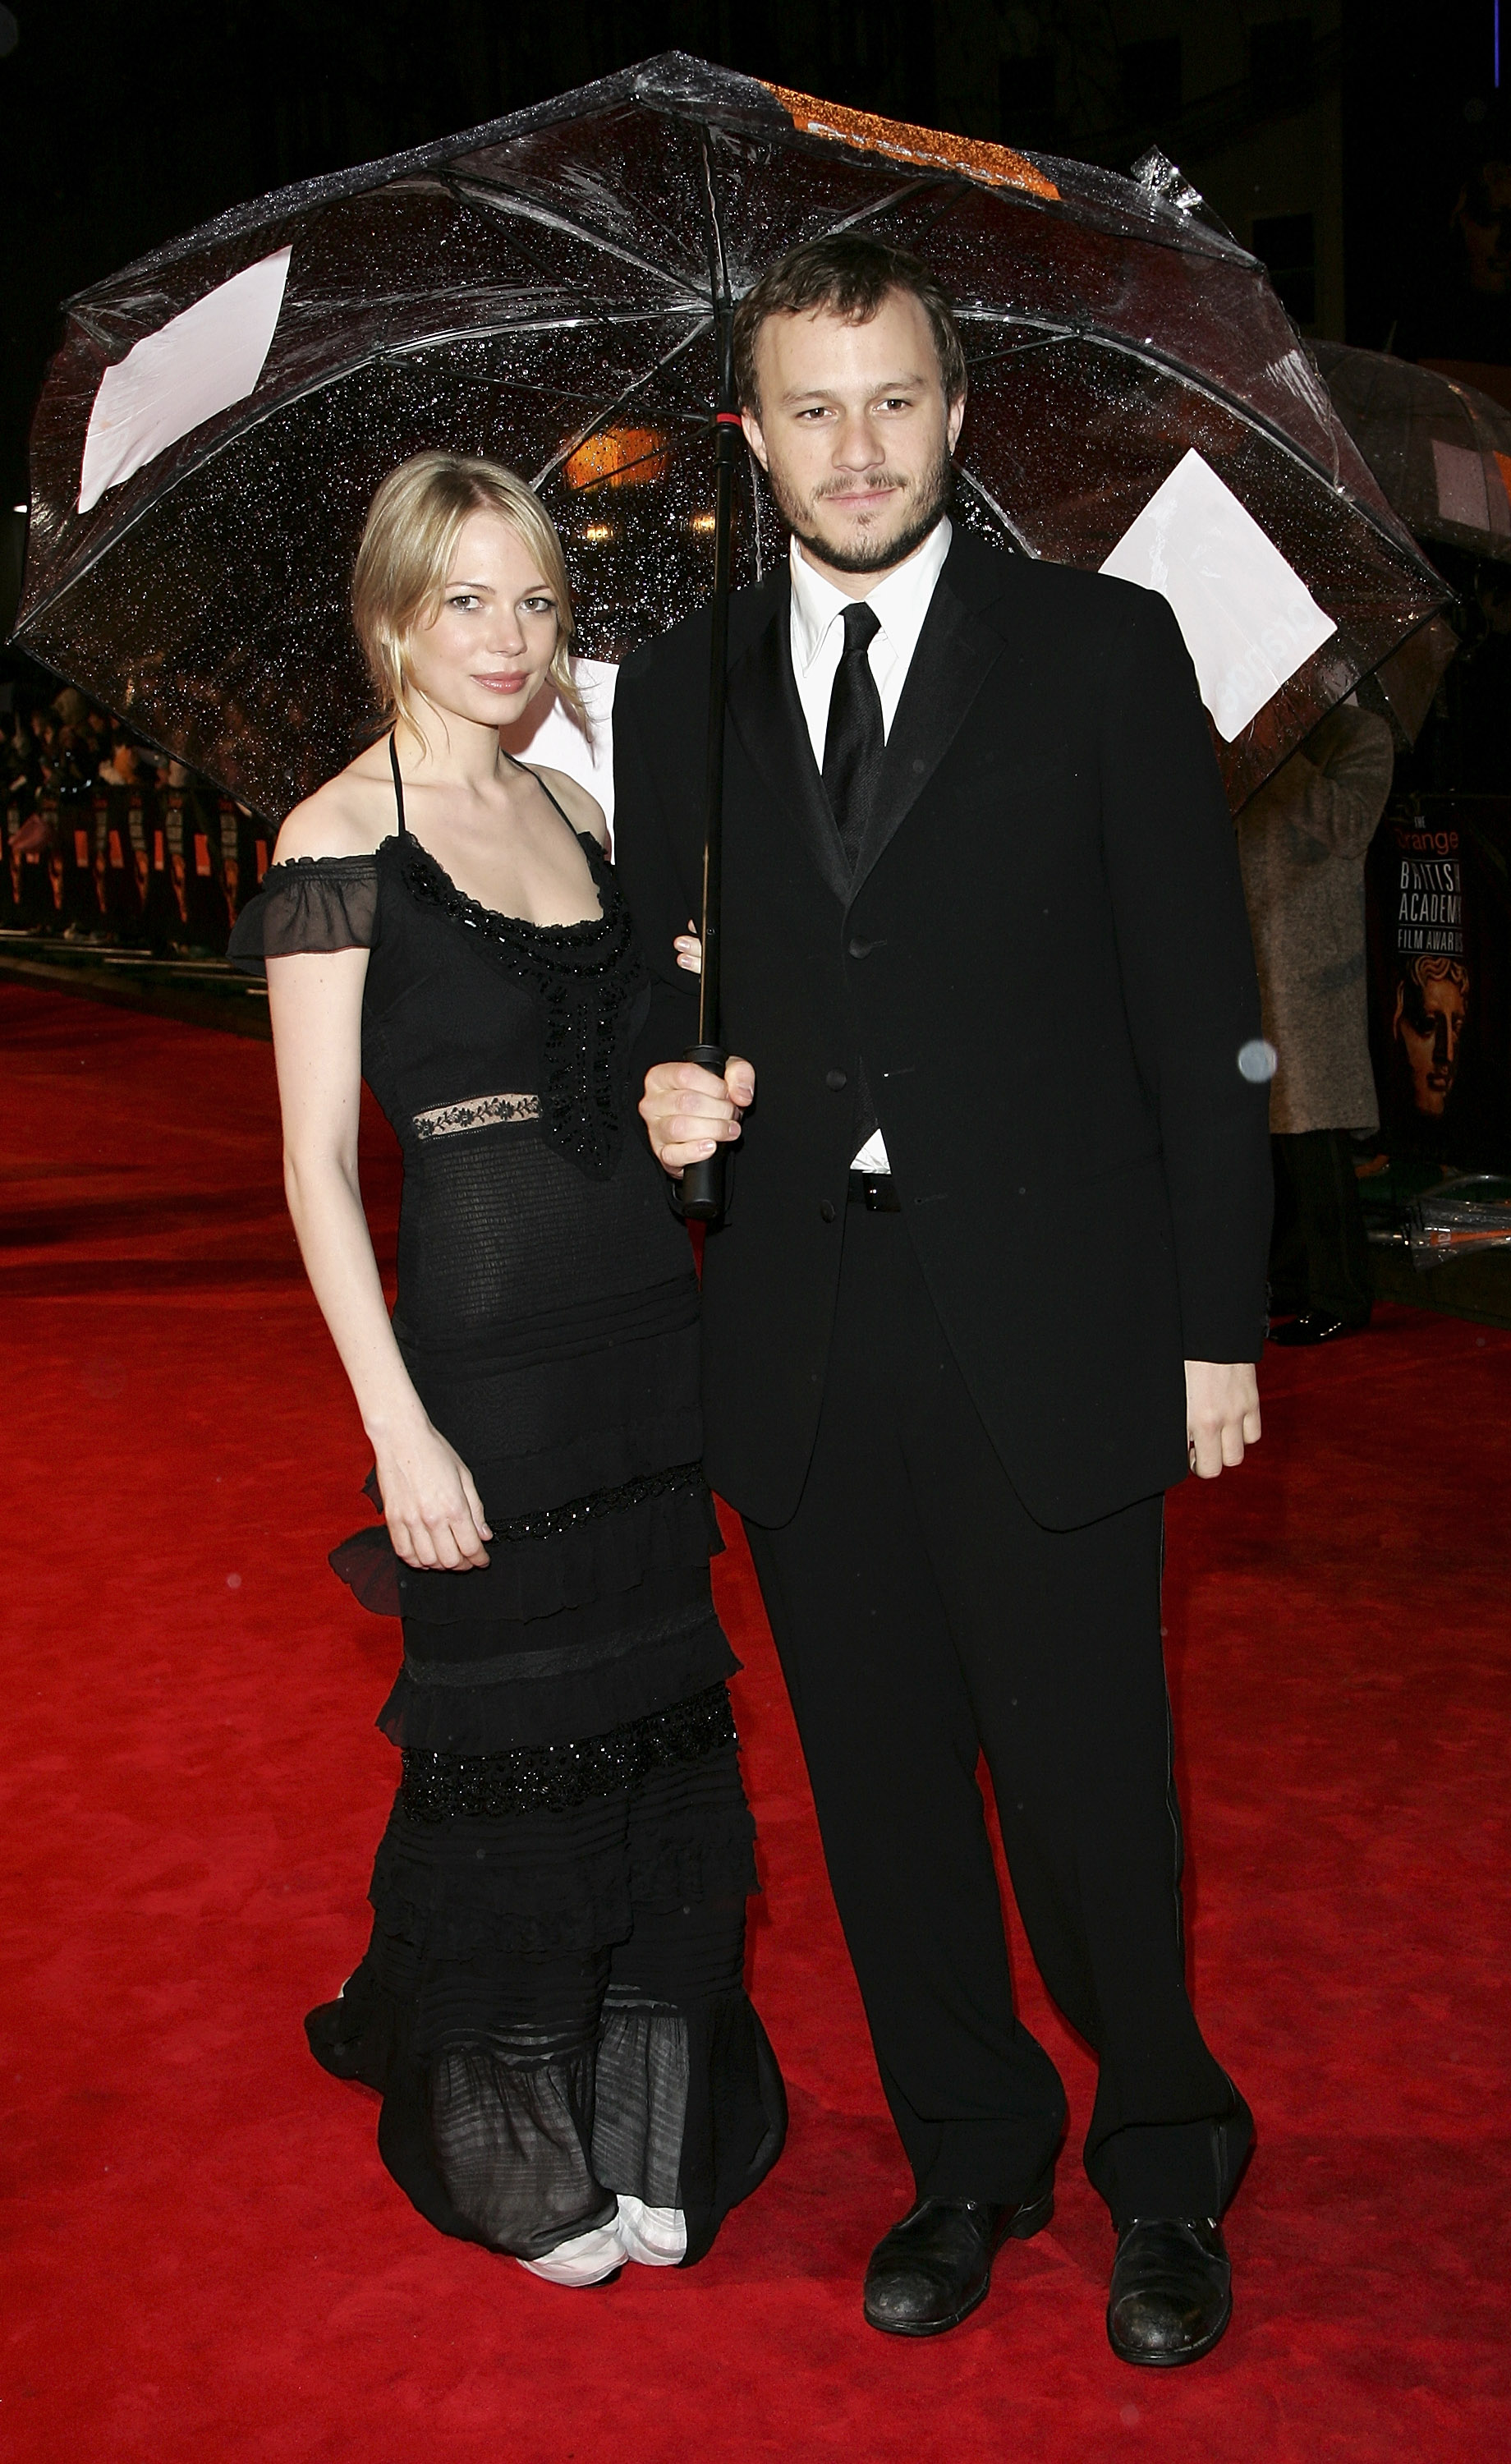 Michelle Williams and Heath Ledger at the Orange British Academy Film Awards (BAFTAs) at the Odeon Leicester Square on February 19, 2006 in London, England.┃Source: Getty Images